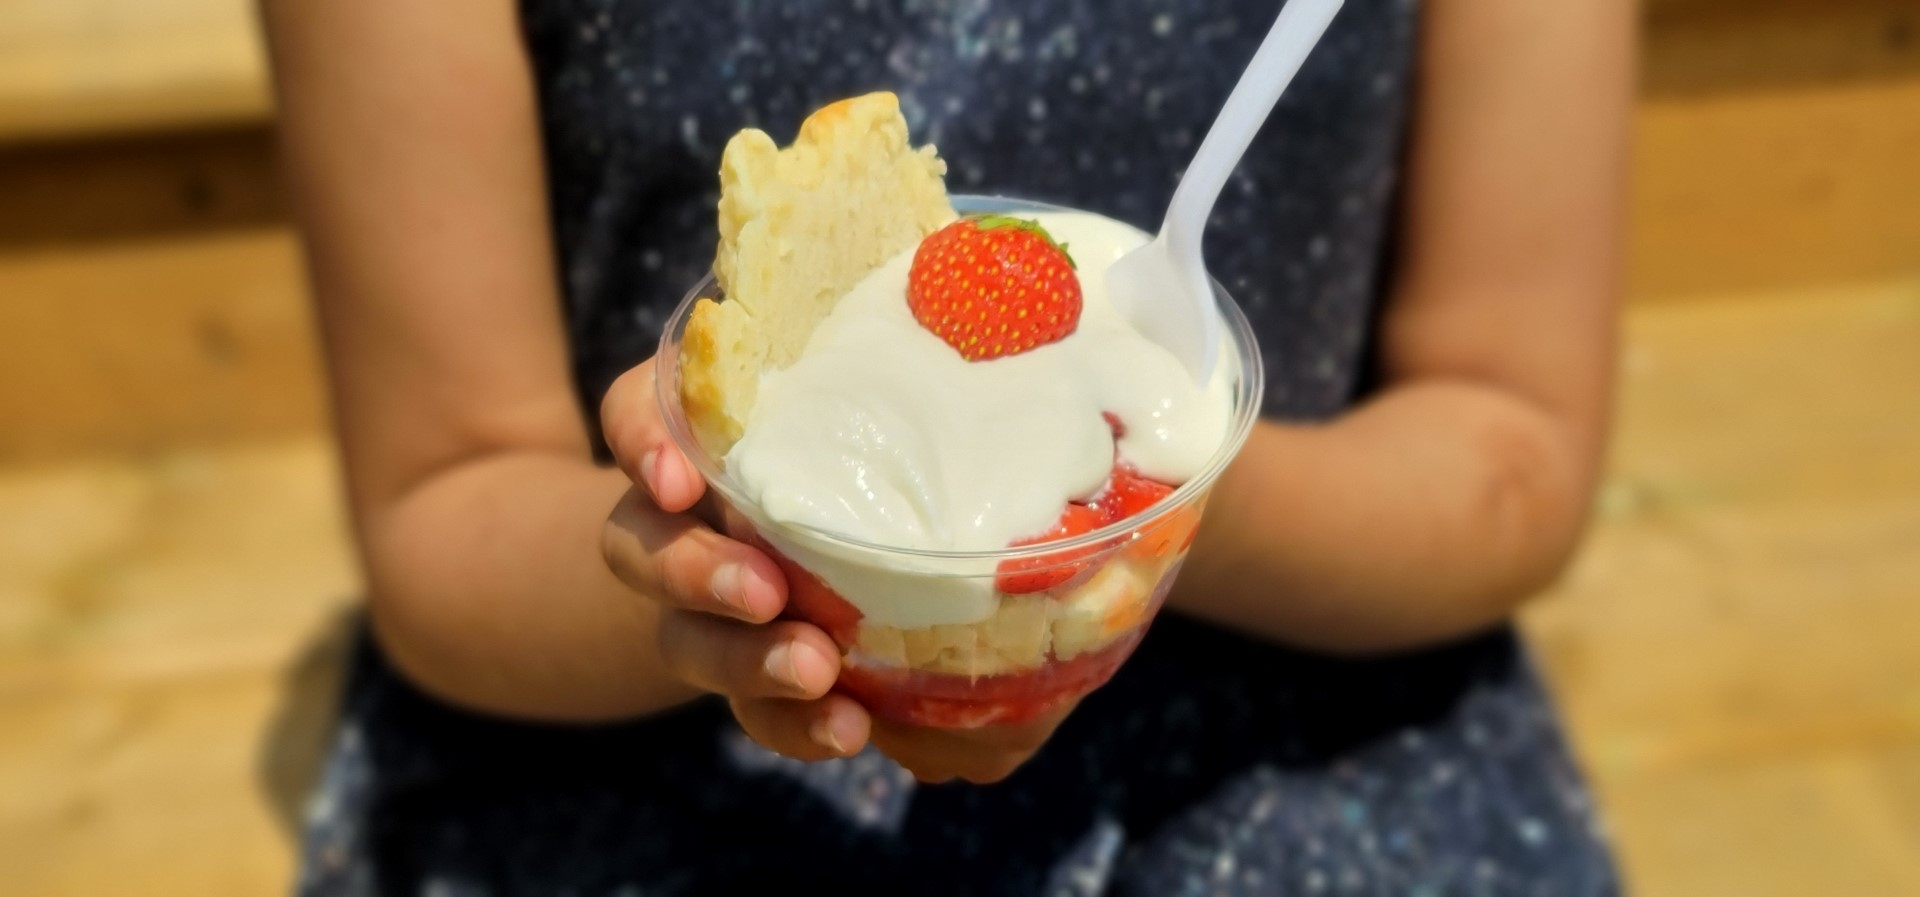 hand holding Strawberry shortcake in cup with white spoon